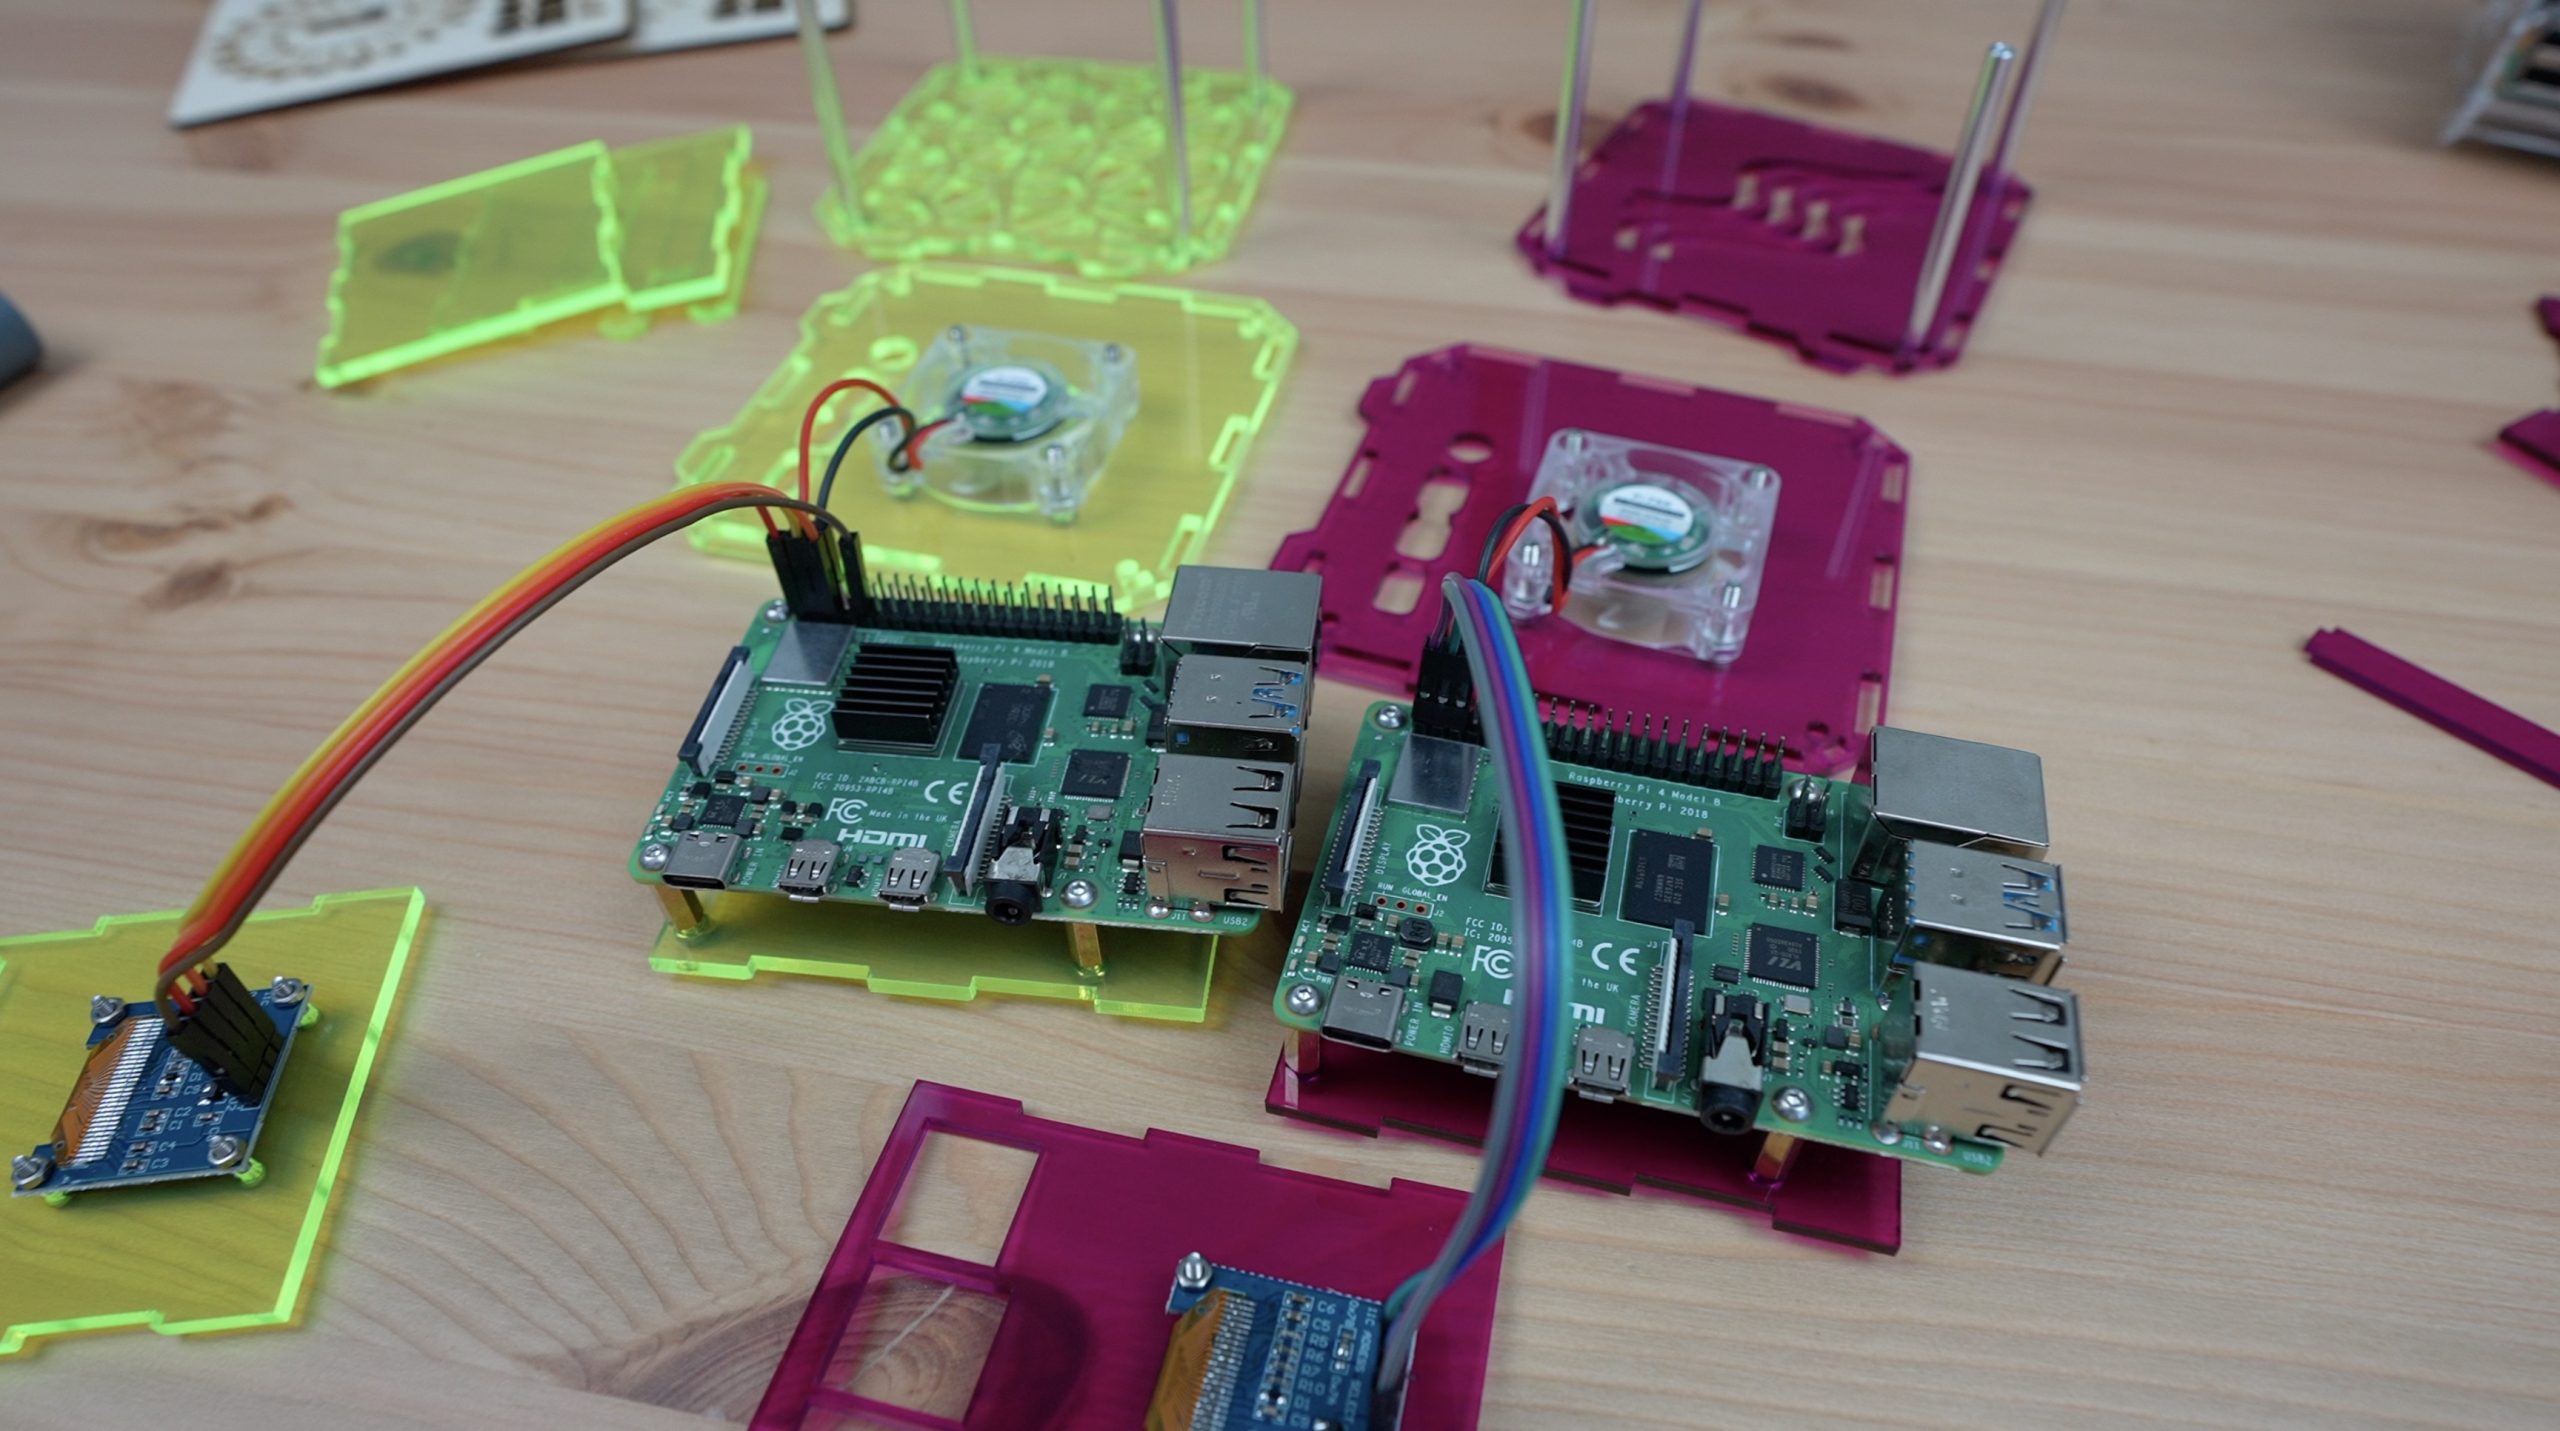 Raspberry Pi's Installed In Coloured Case Components